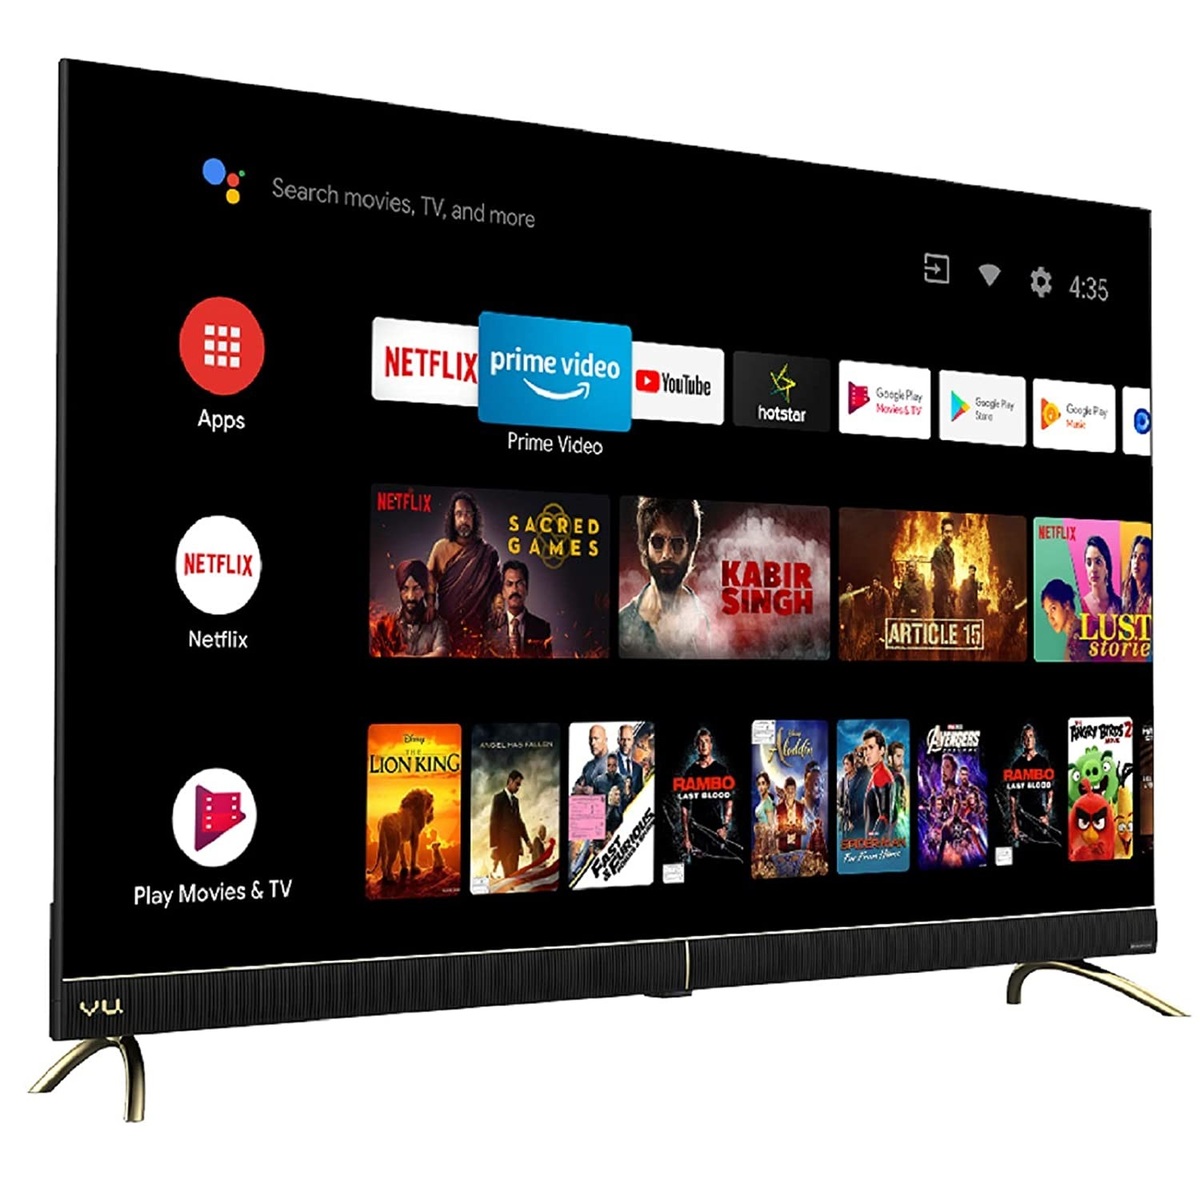 VU 4k ultra HD LED Android 9 Pie TV 50CA 50"